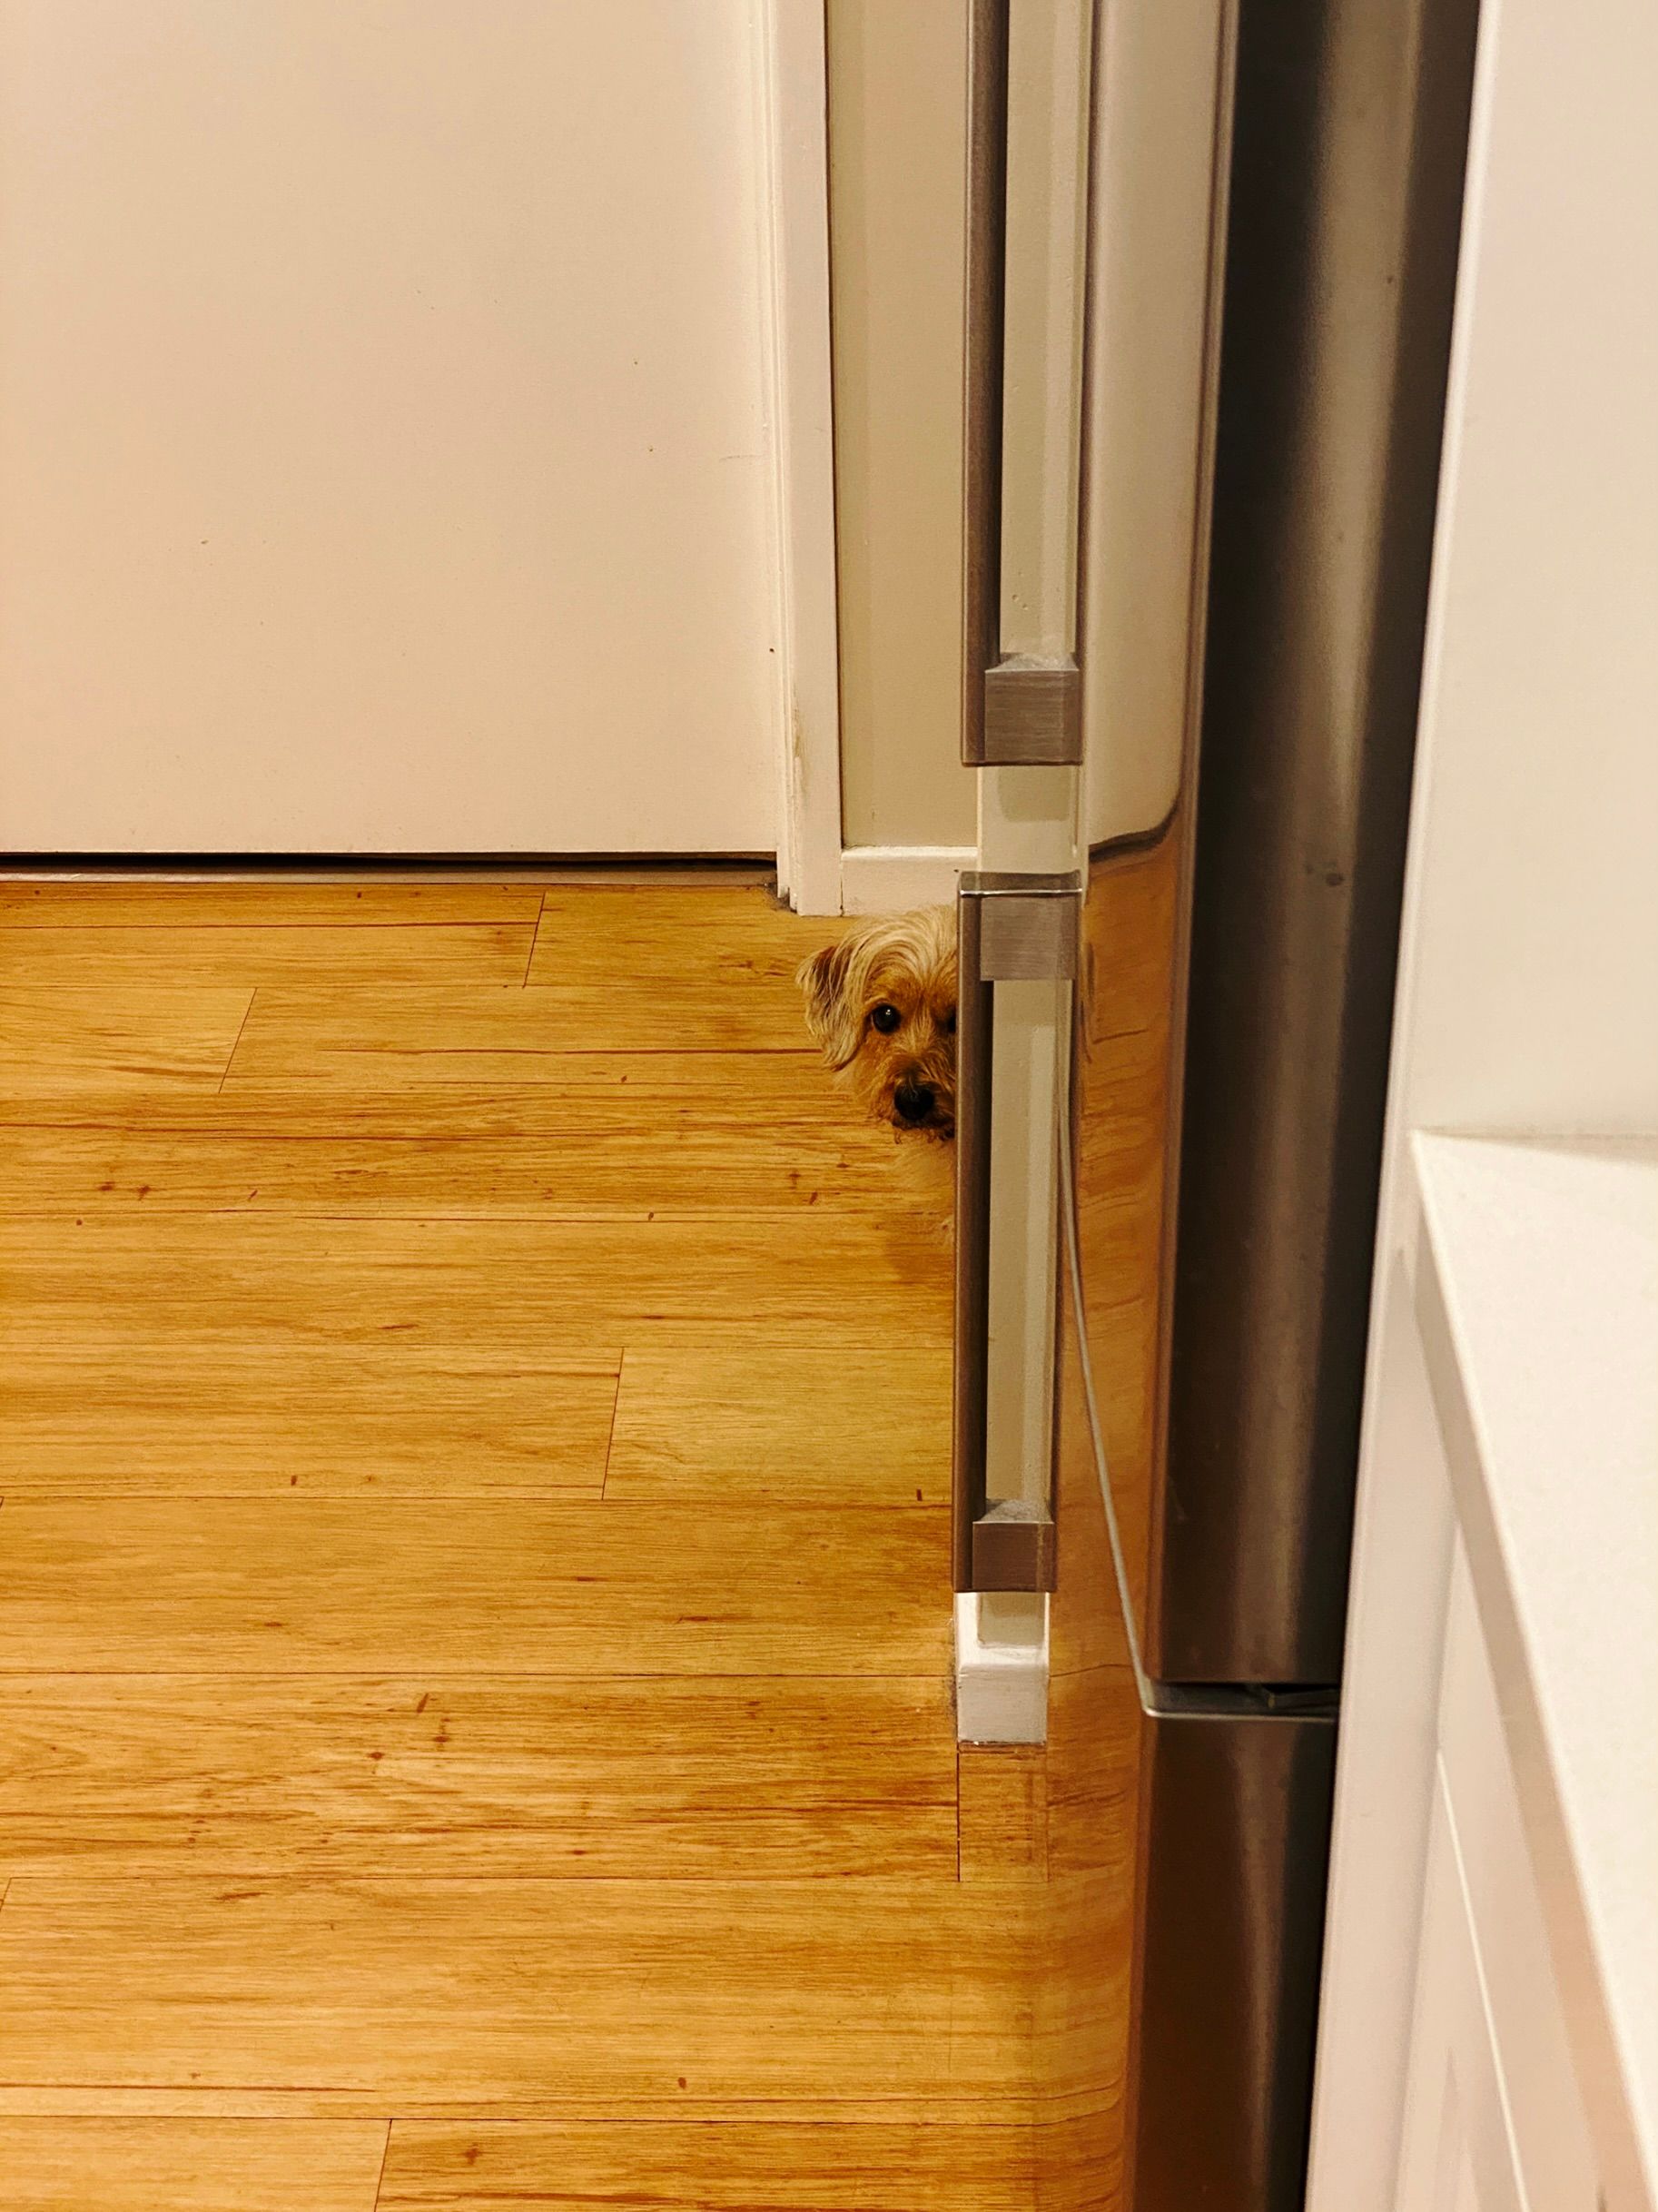 A photo of a small scruffy blonde dog that has just one of his eyes visible and none of his body while he stares at me from around the entrance to our hallway.